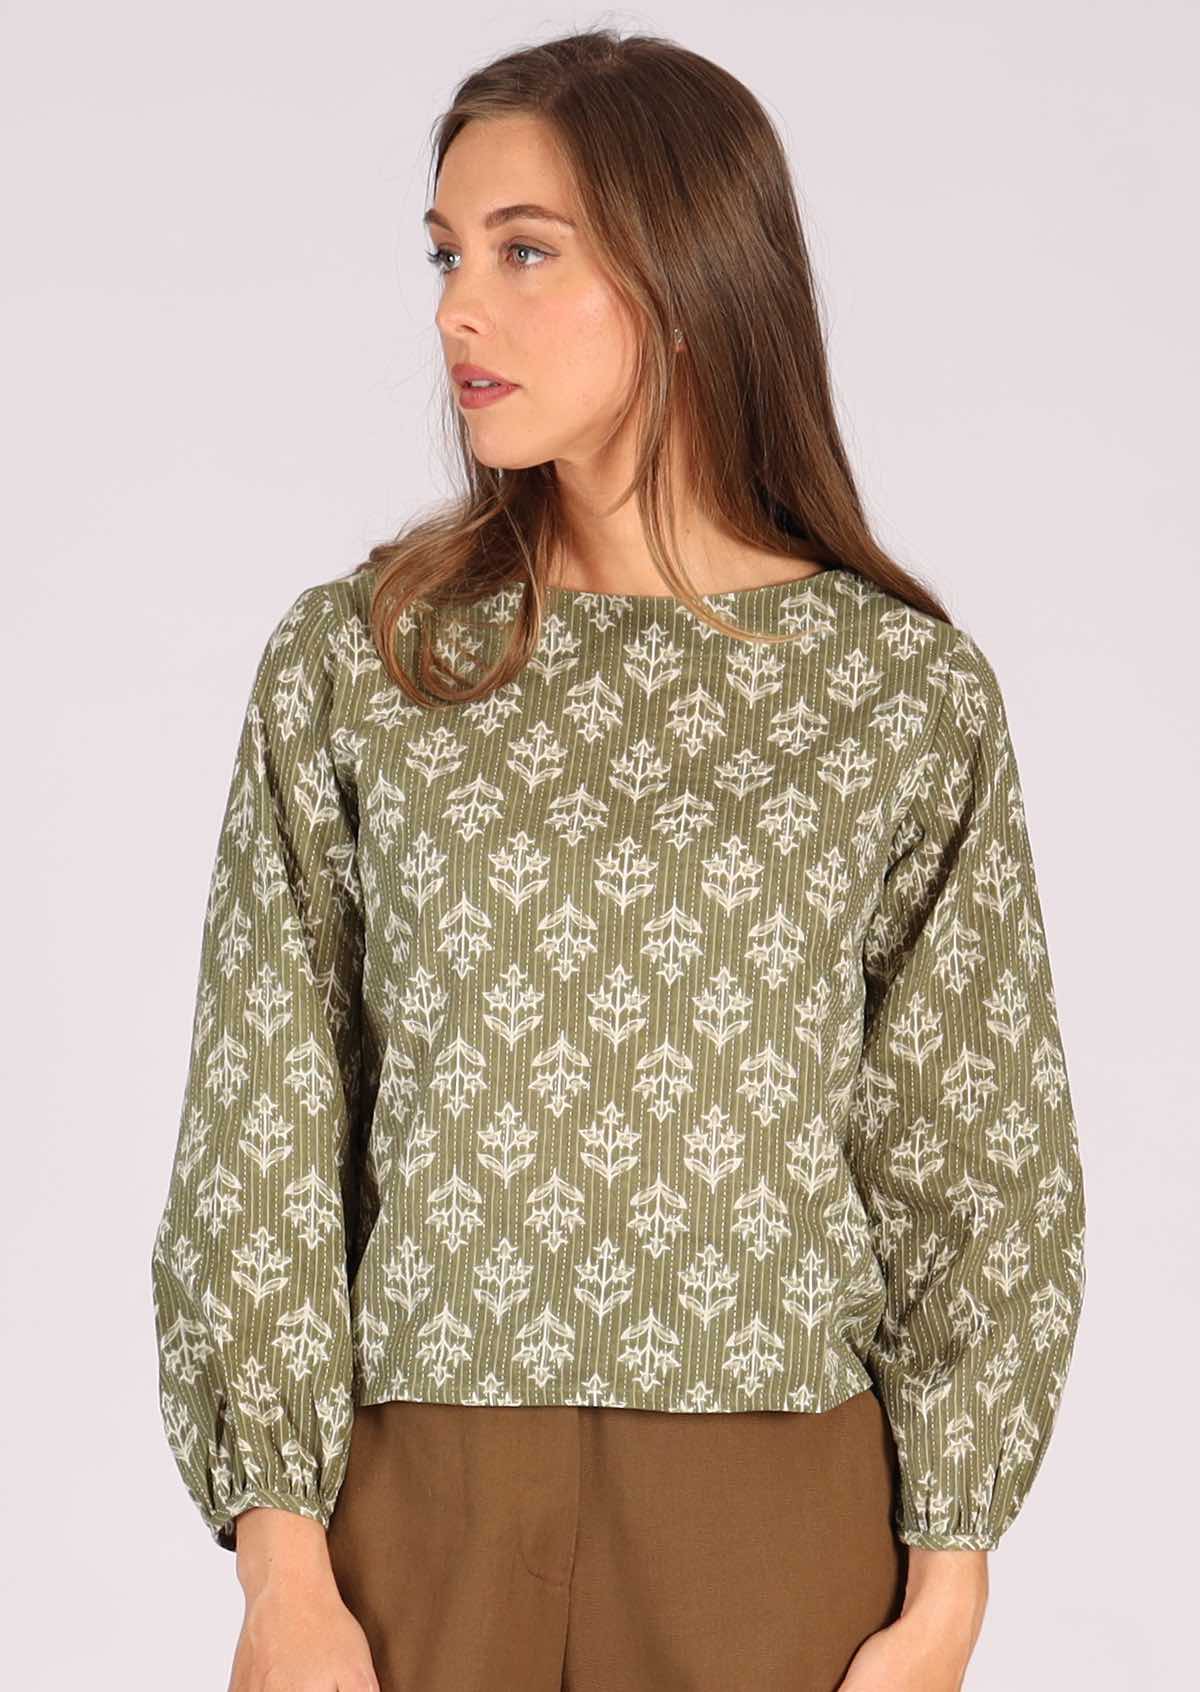 Lightweight cotton long sleeve top with bishop sleeves